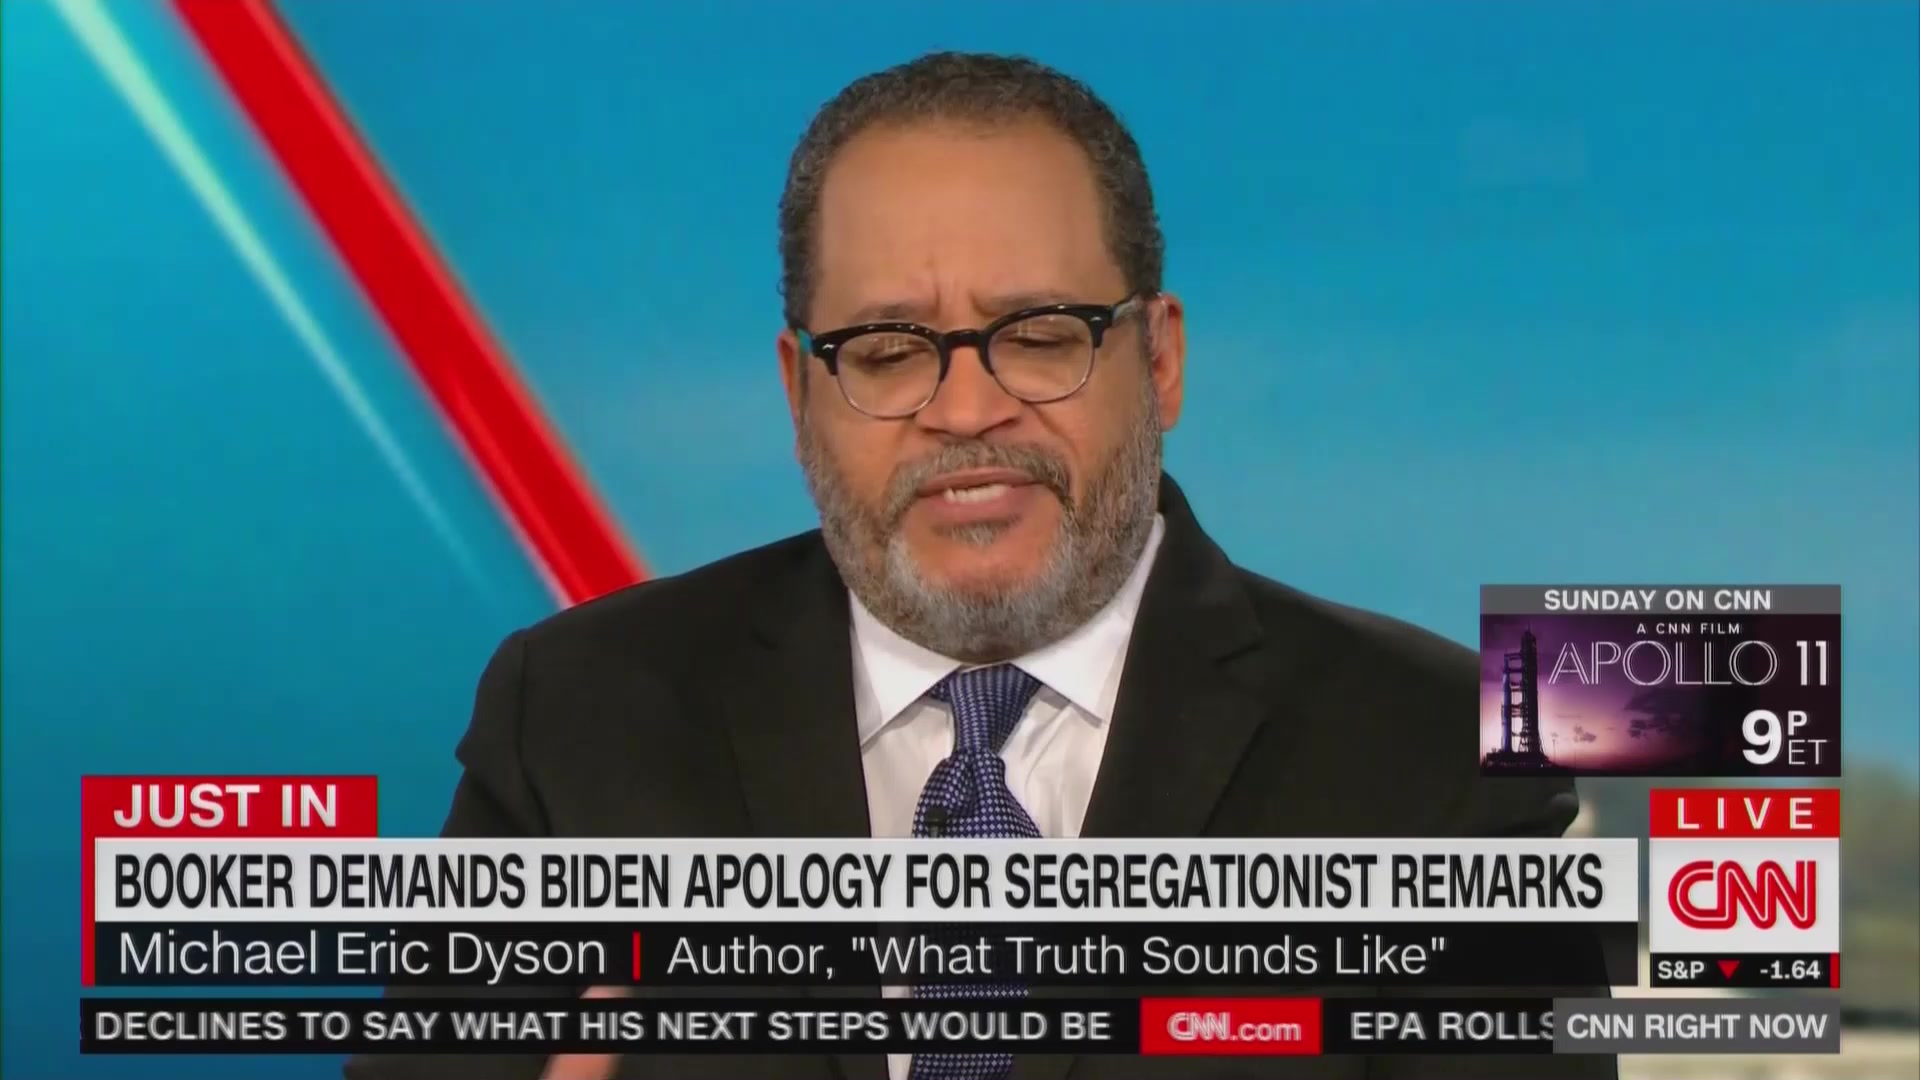 Michael Eric Dyson Calls on Biden to Apologize Over ‘Boy’ Remarks: ‘You Can’t Joke About That’